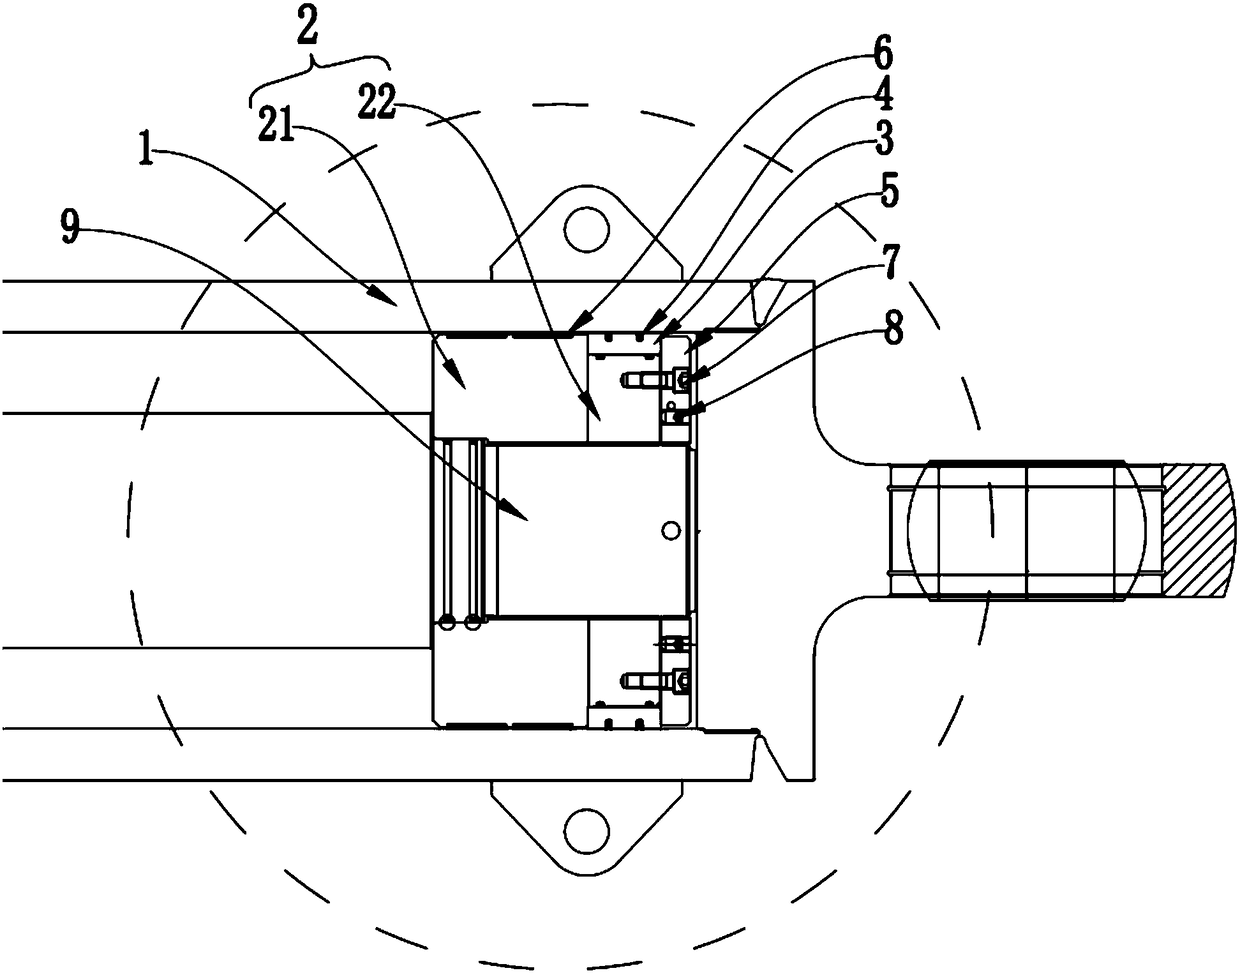 Hydraulic oil cylinder piston design capable of preventing cylinder tube from being damaged